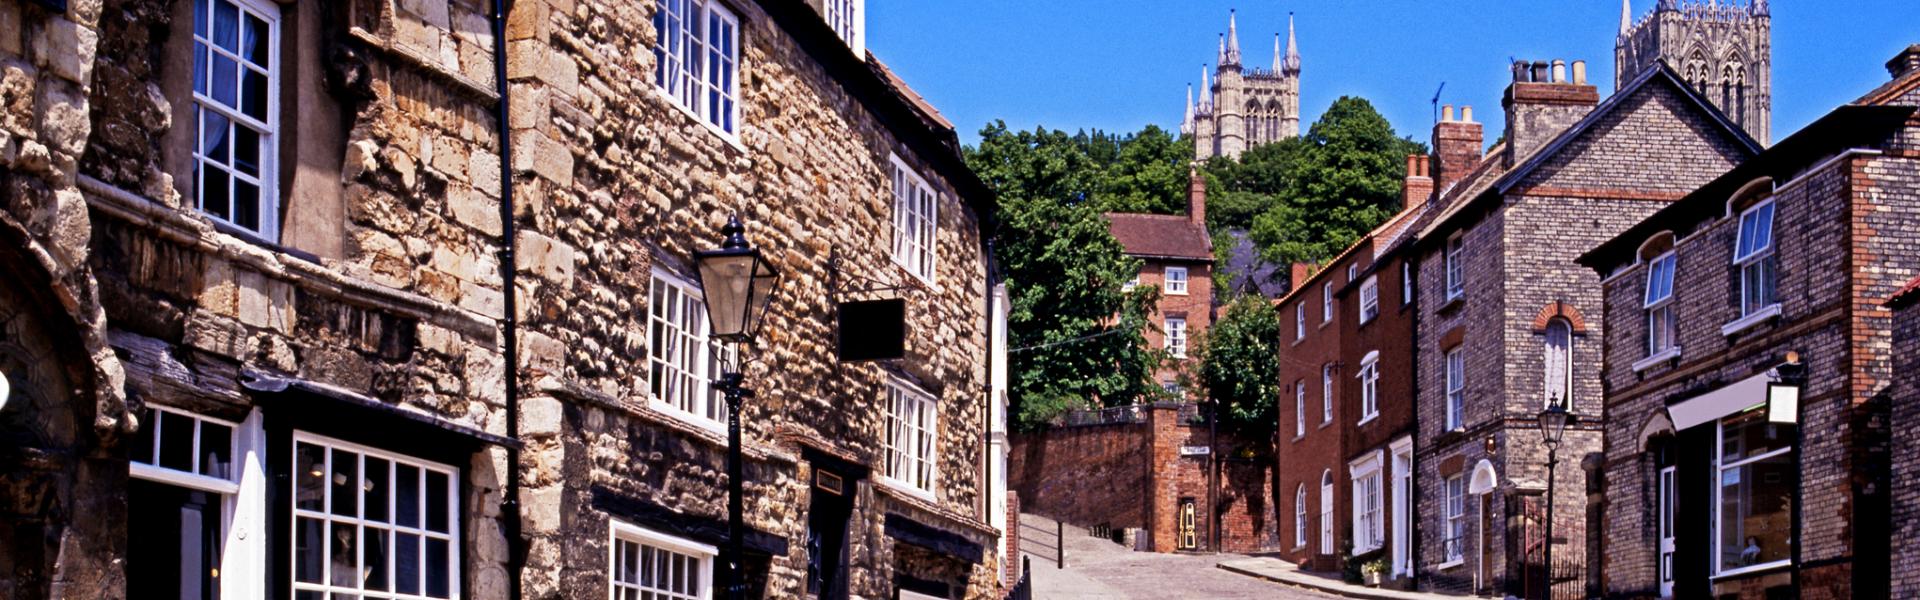 Holiday lettings & accommodation in Stamford - HomeToGo